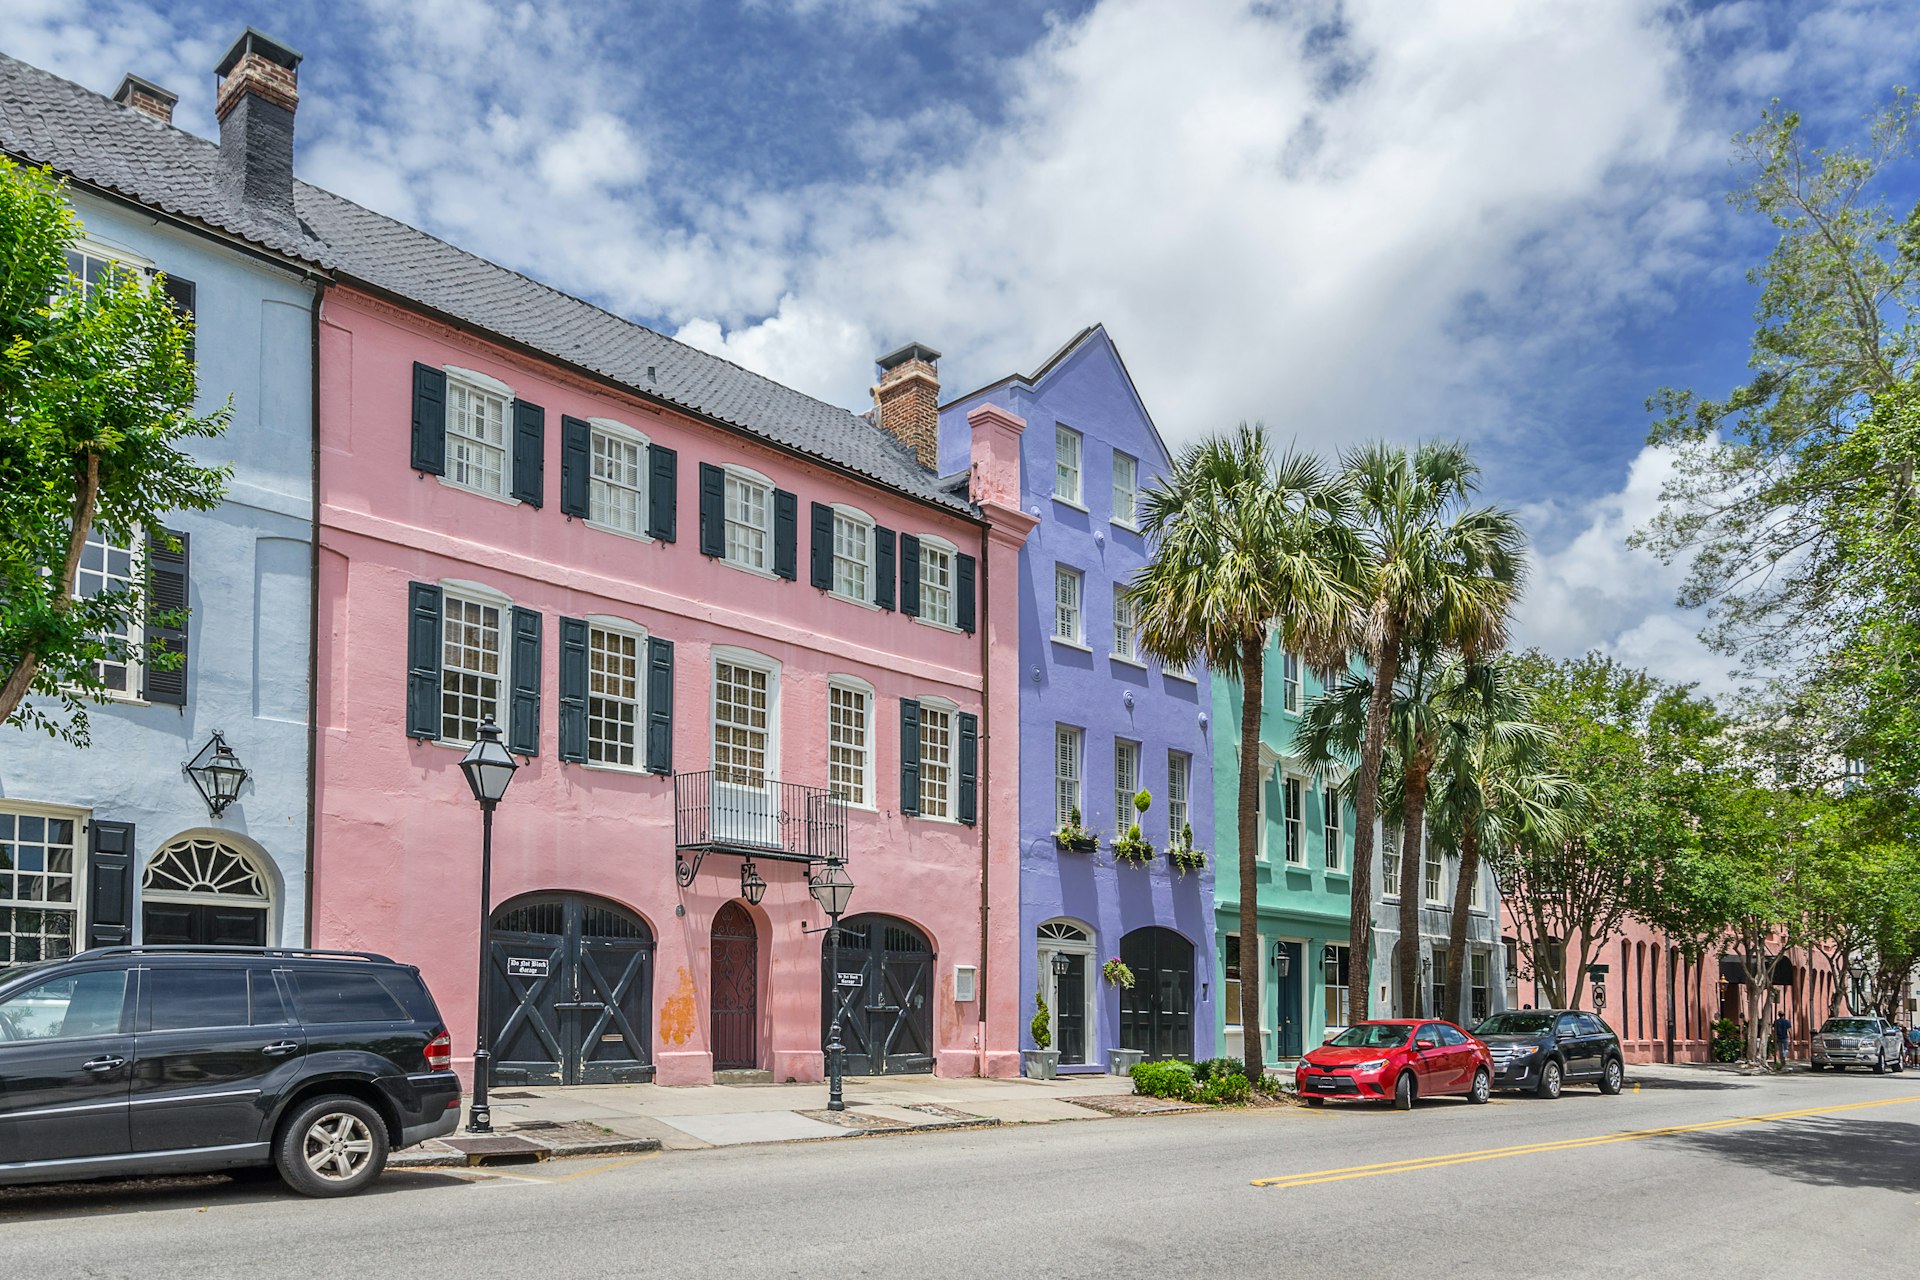 Rainbow Row, a run of several brightly coloured houses in Charleston in South Carolina.